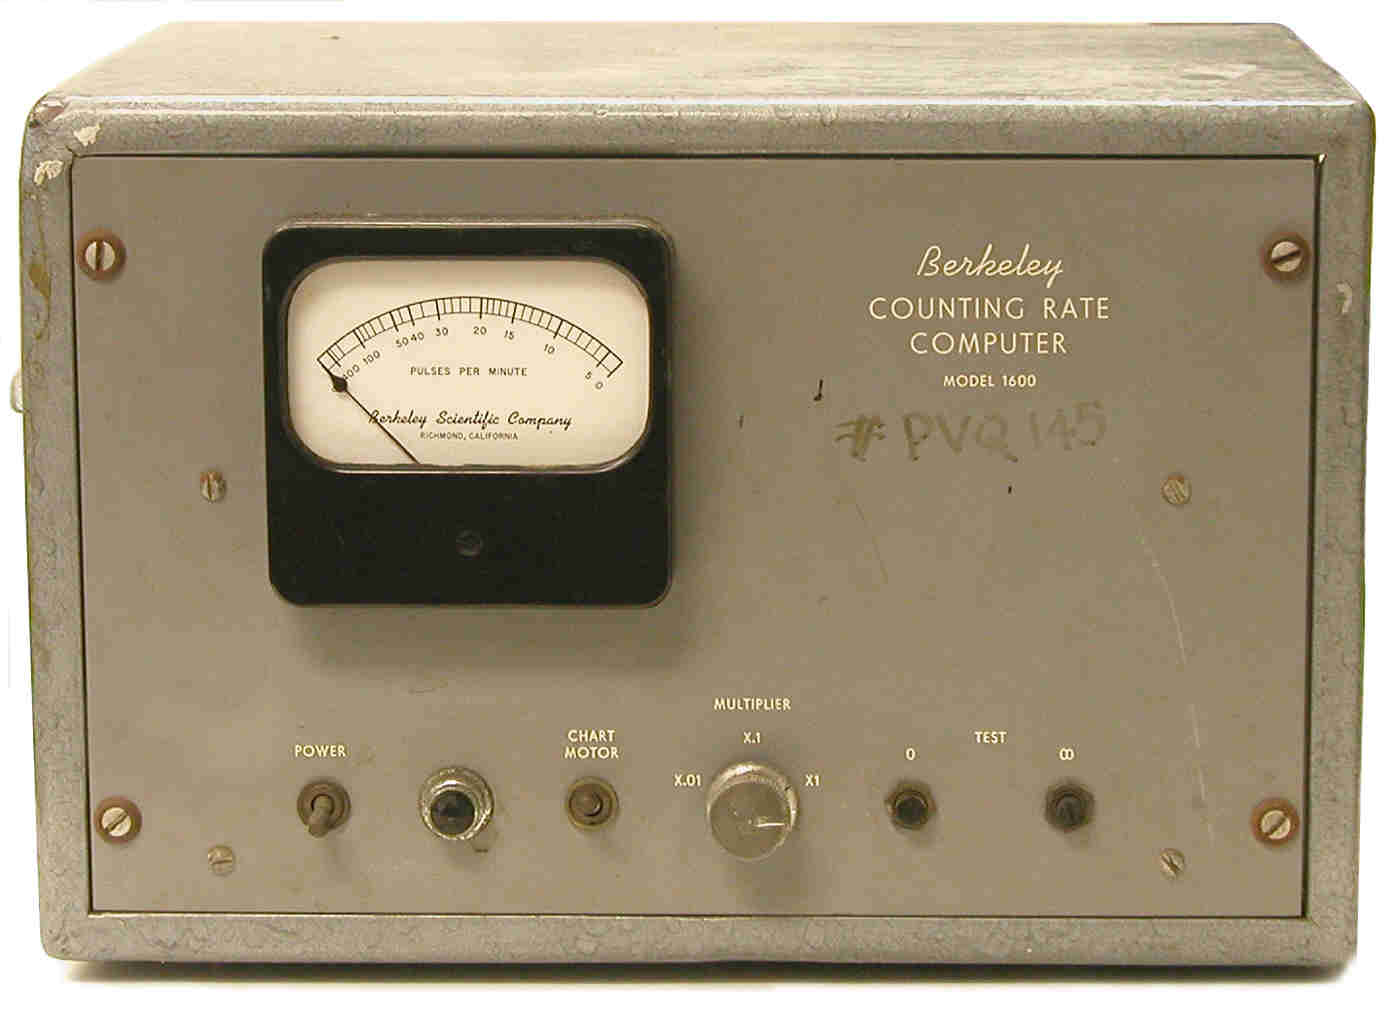 Berkeley Counting Rate Computer